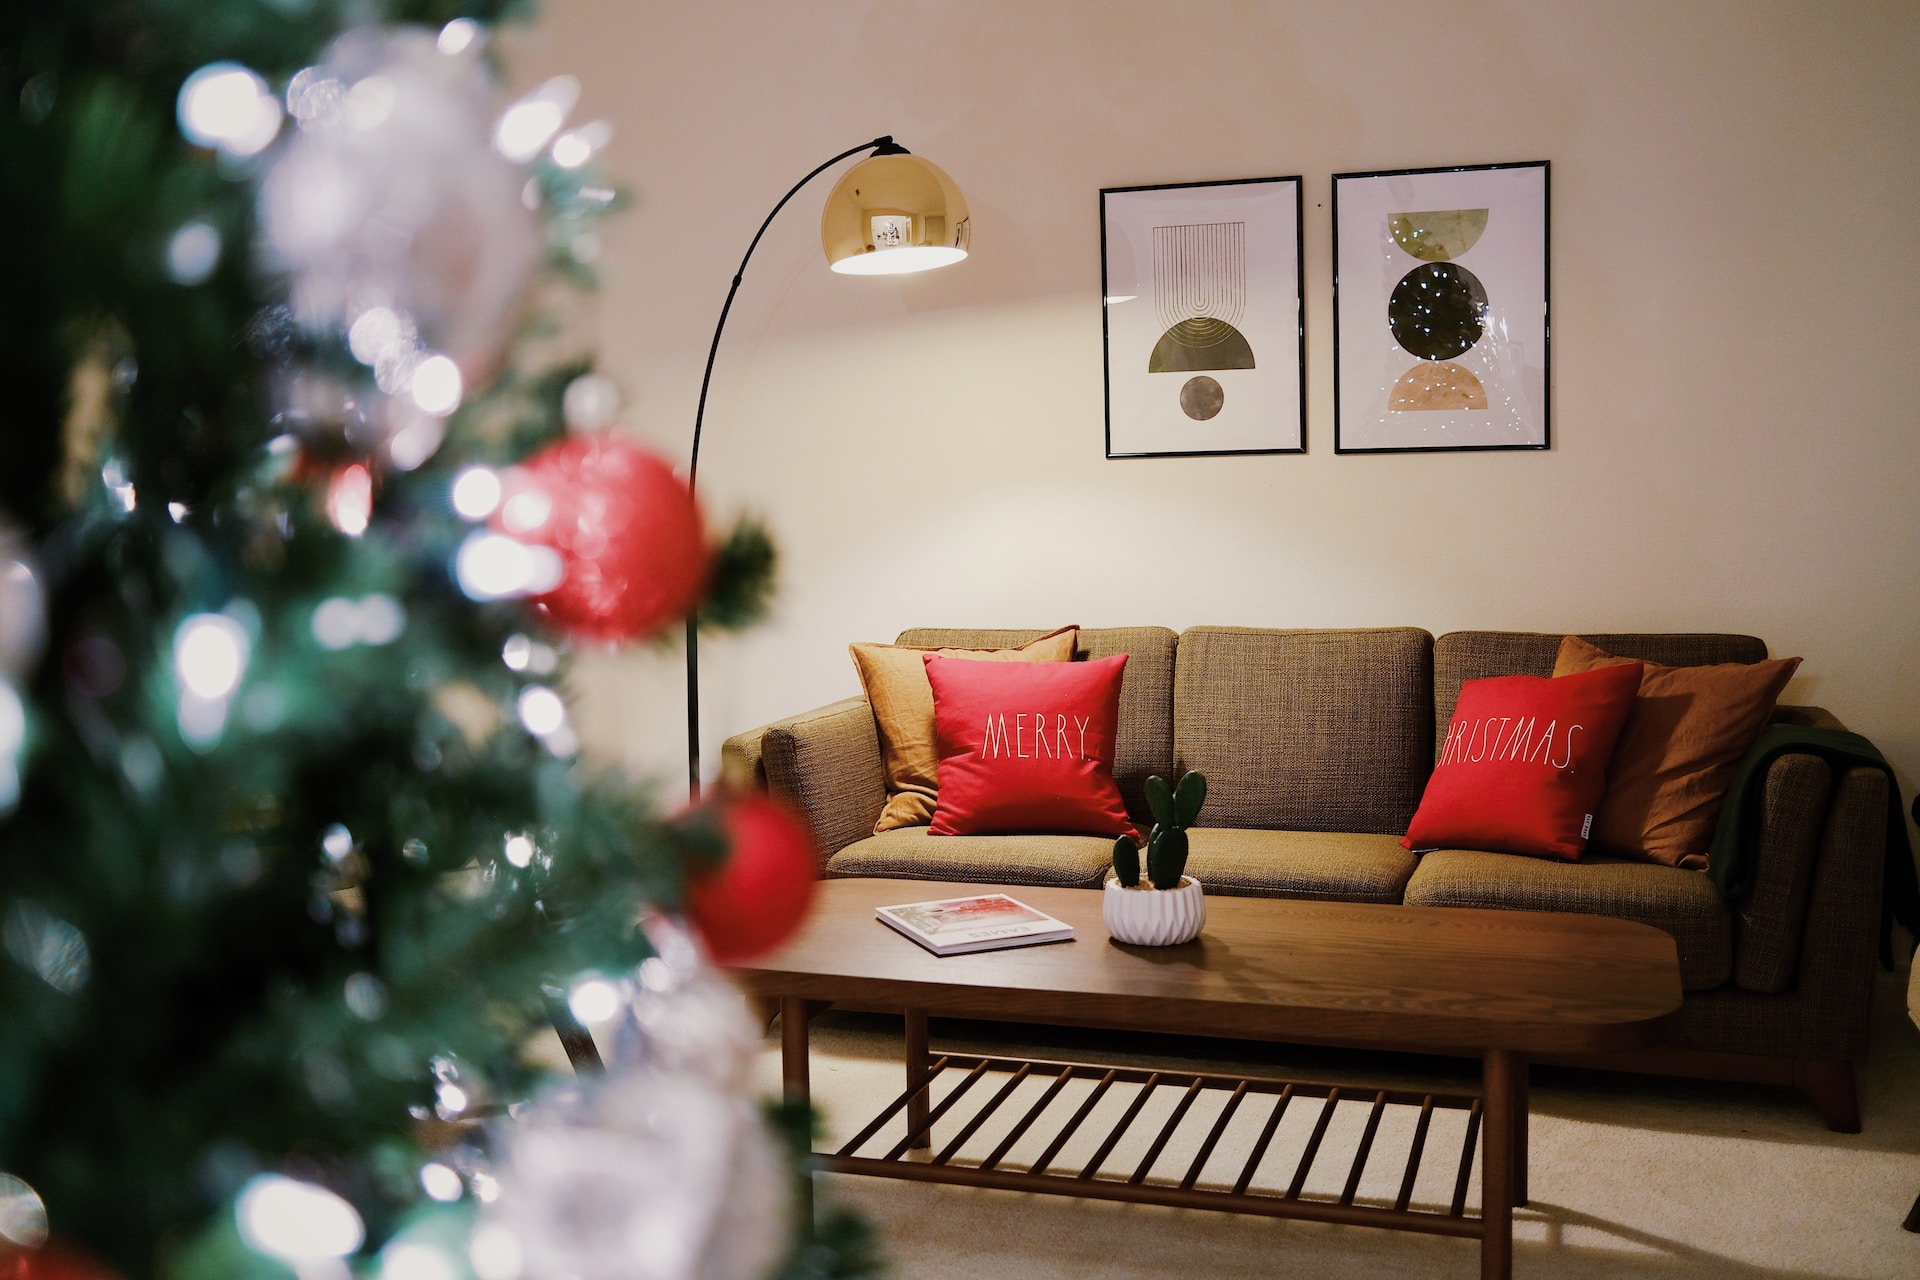 Deck the Halls & Clean Them Too: 8 Festive Cleaning Hacks for a Sparkling Yuletide Season!